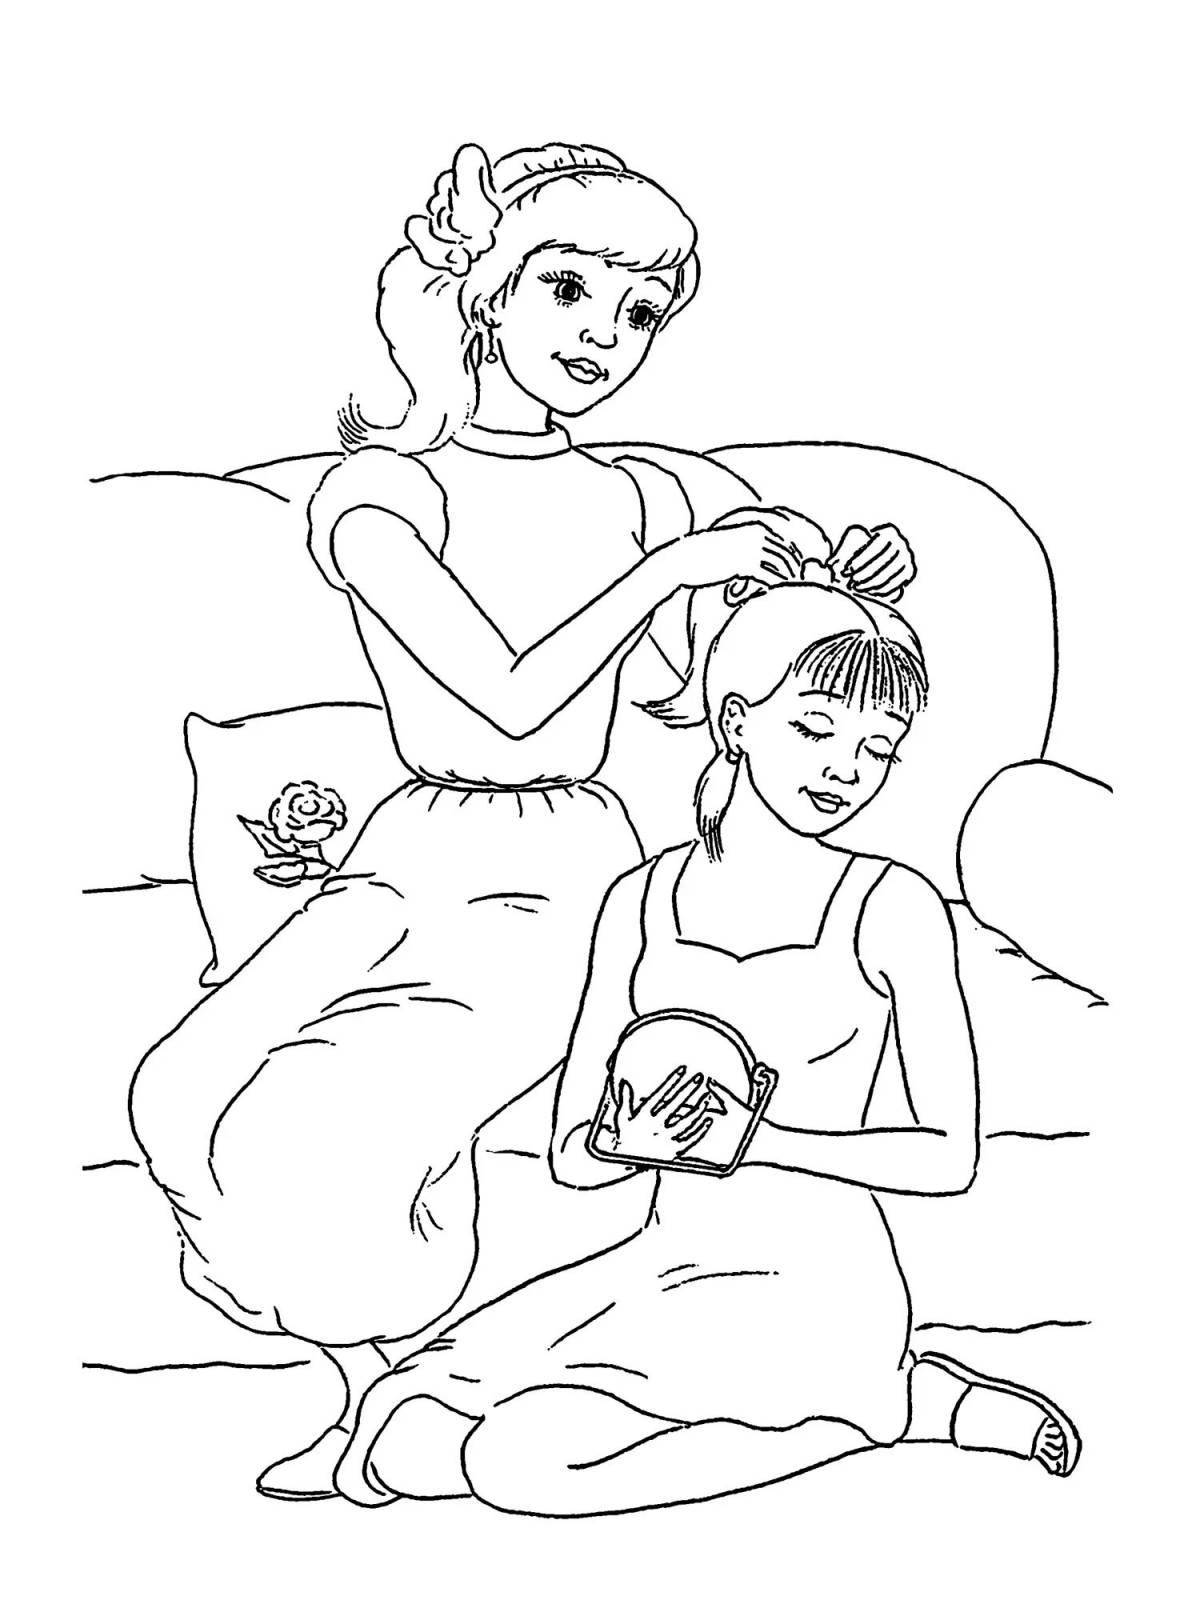 Coloring book cheerful hairdresser for children